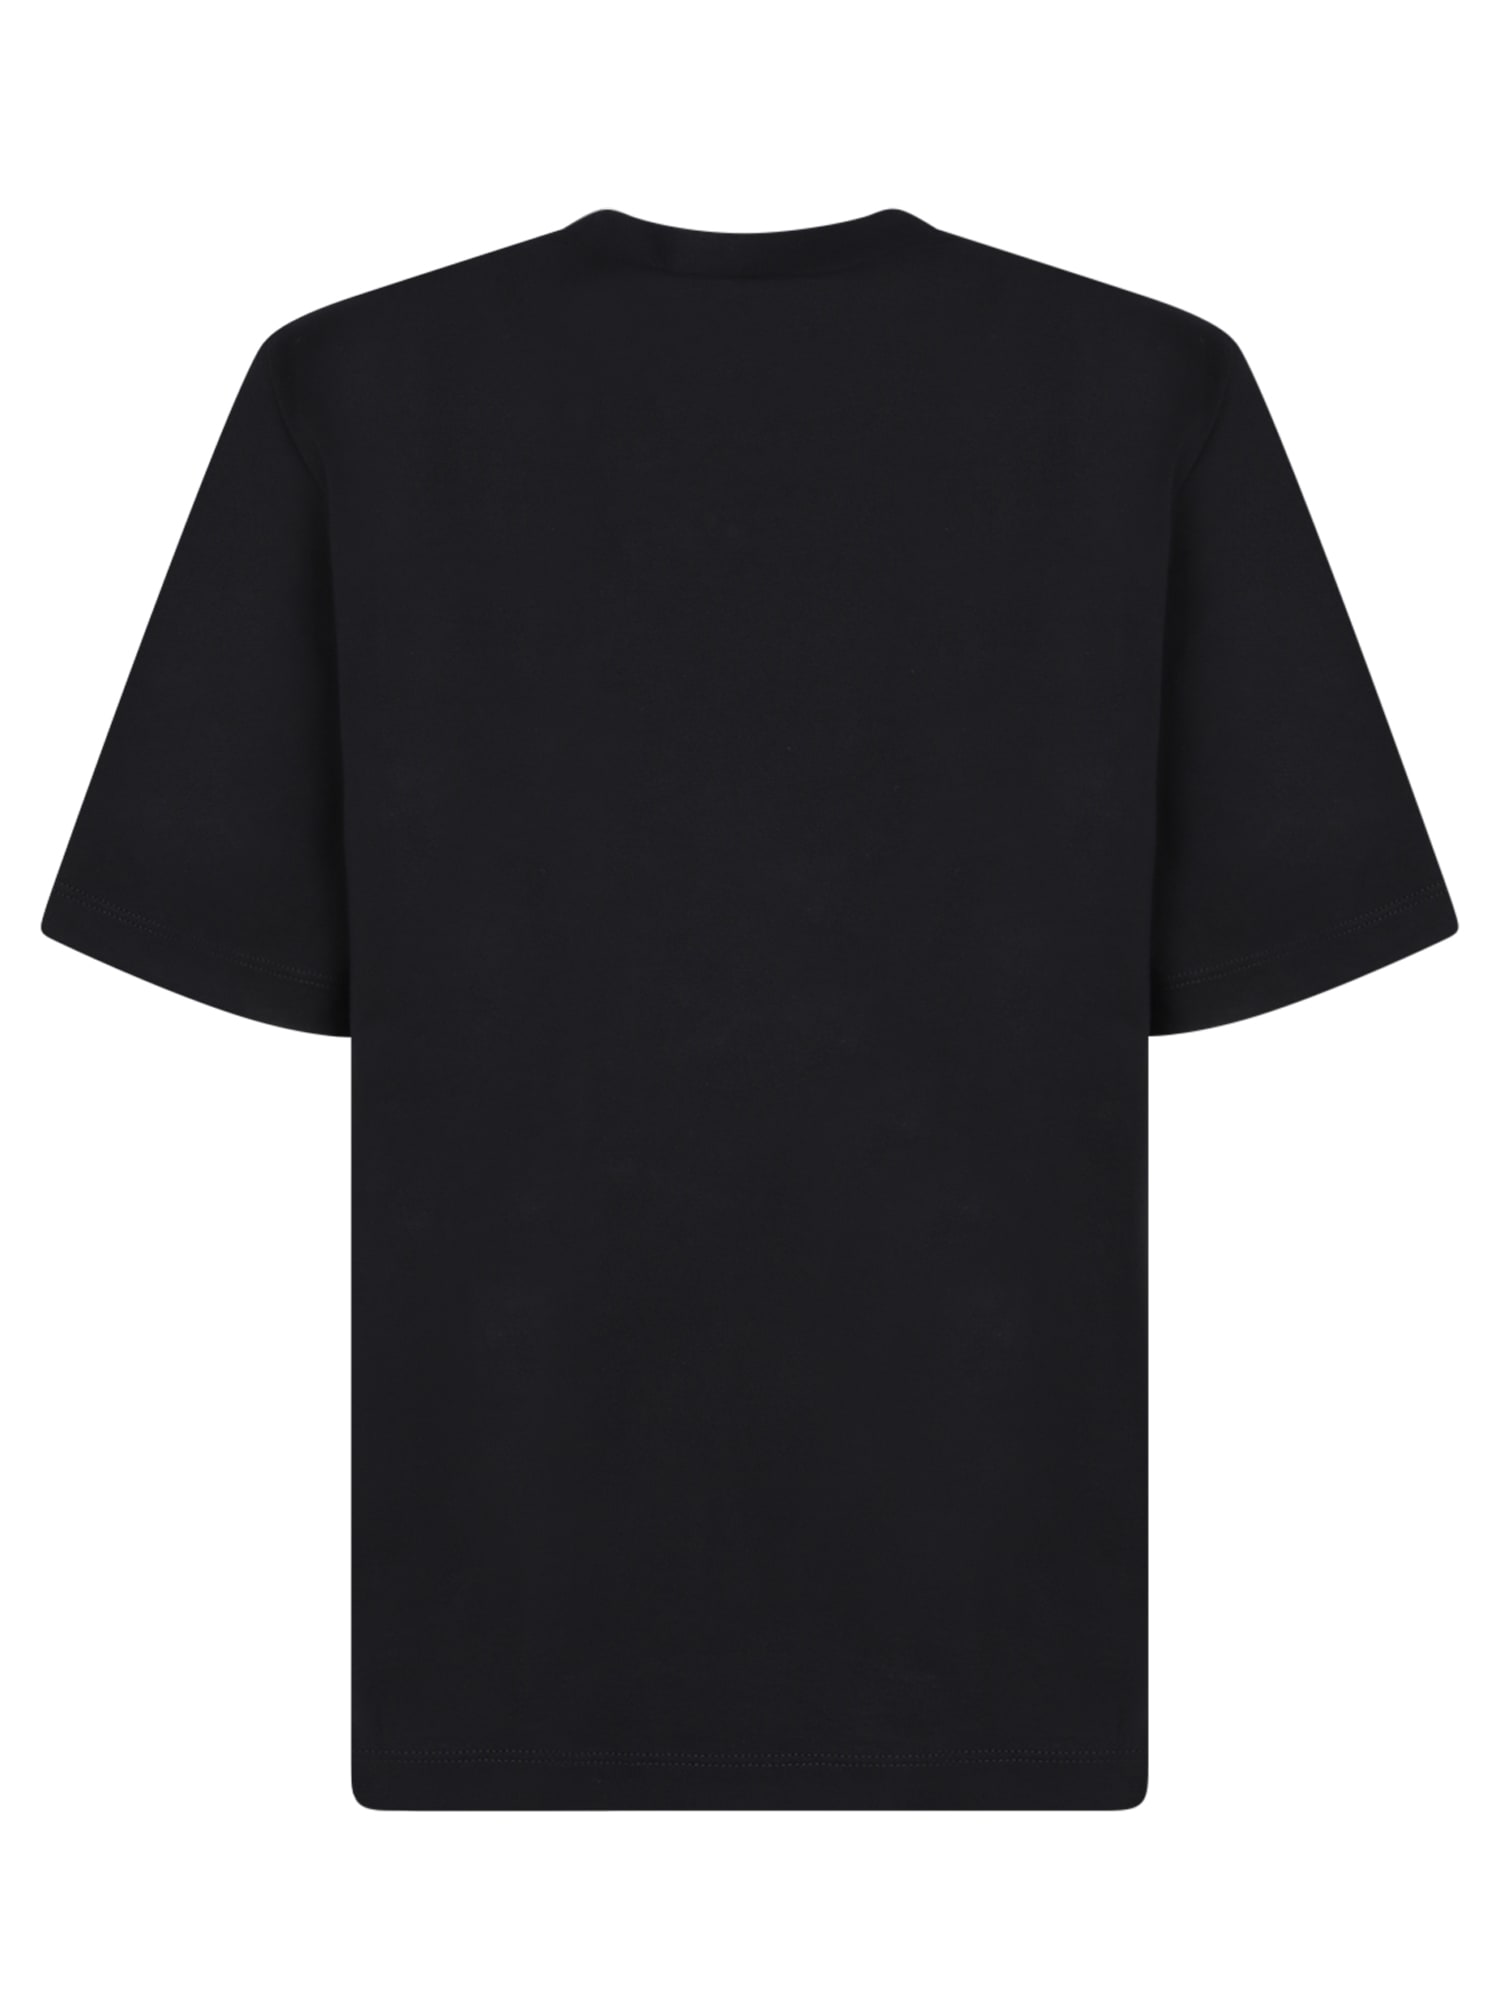 Shop Dsquared2 Icon Forever Black T-shirt